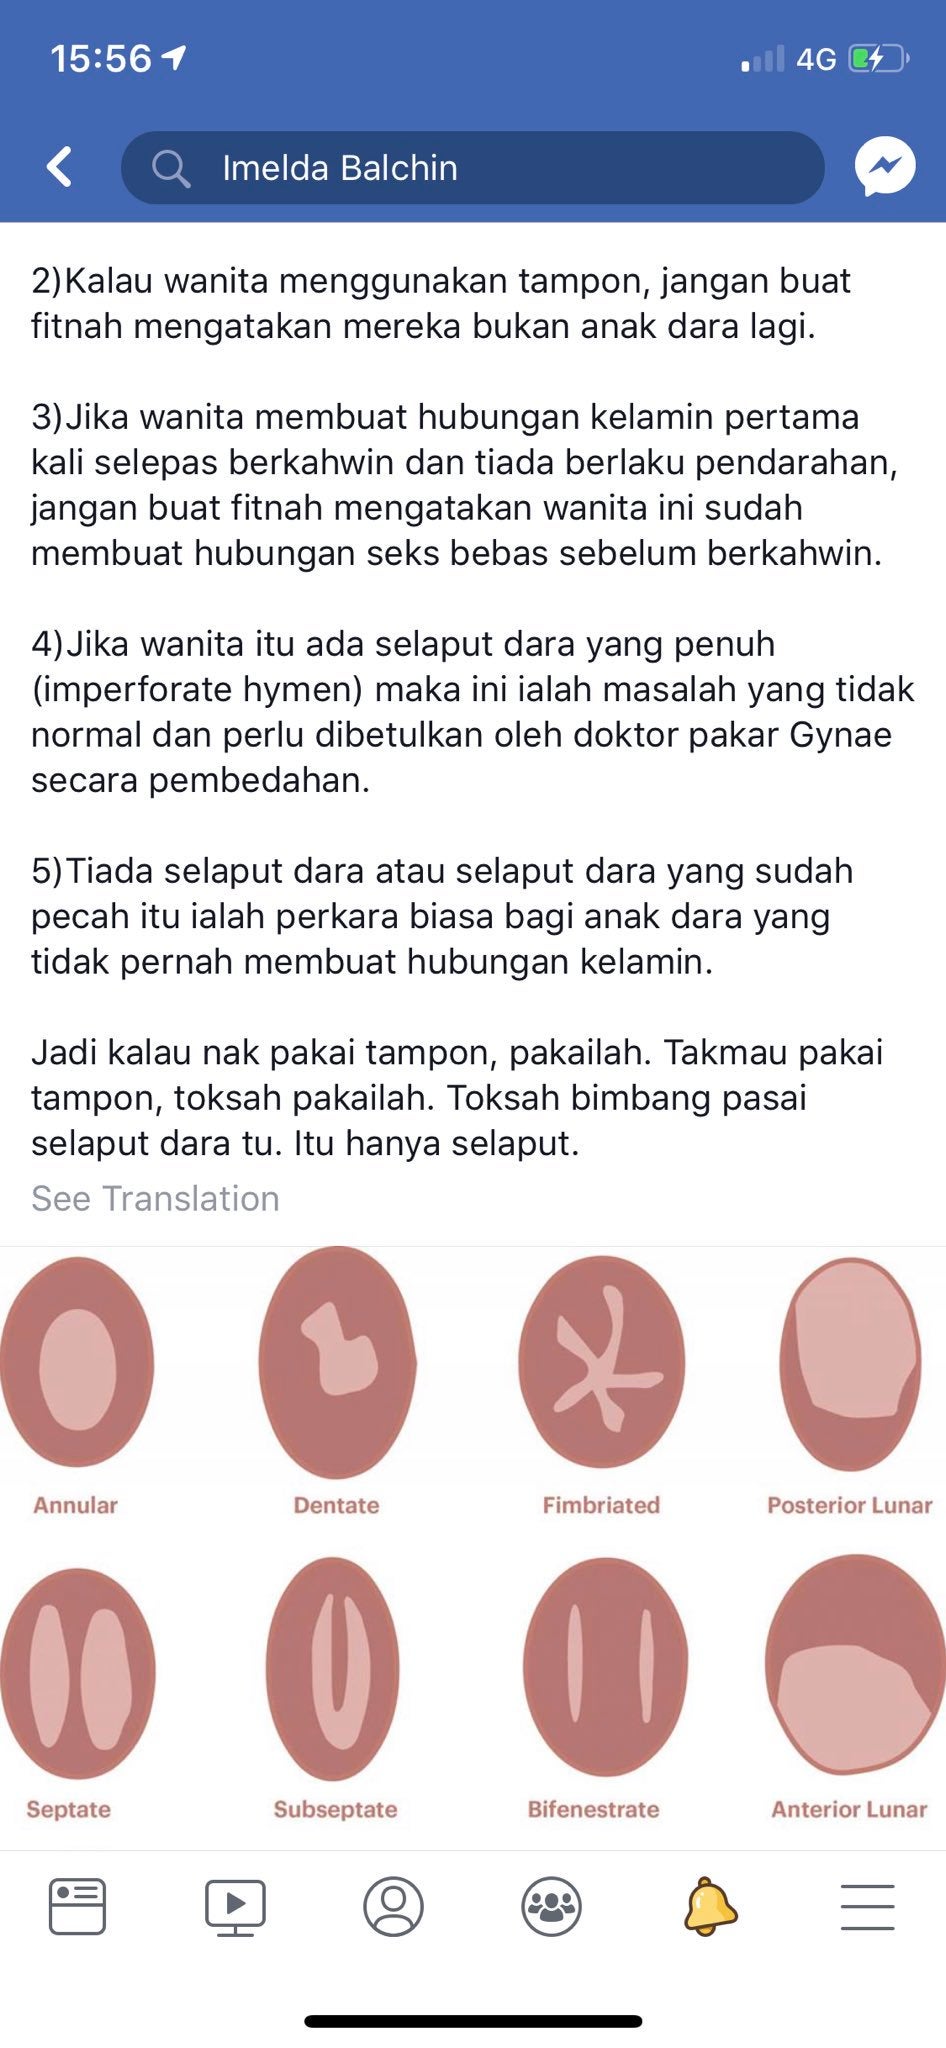 Malaysian Man & Family Asks Fiancee to Prove Her Virginity Before They Can Get Married - WORLD OF BUZZ 3